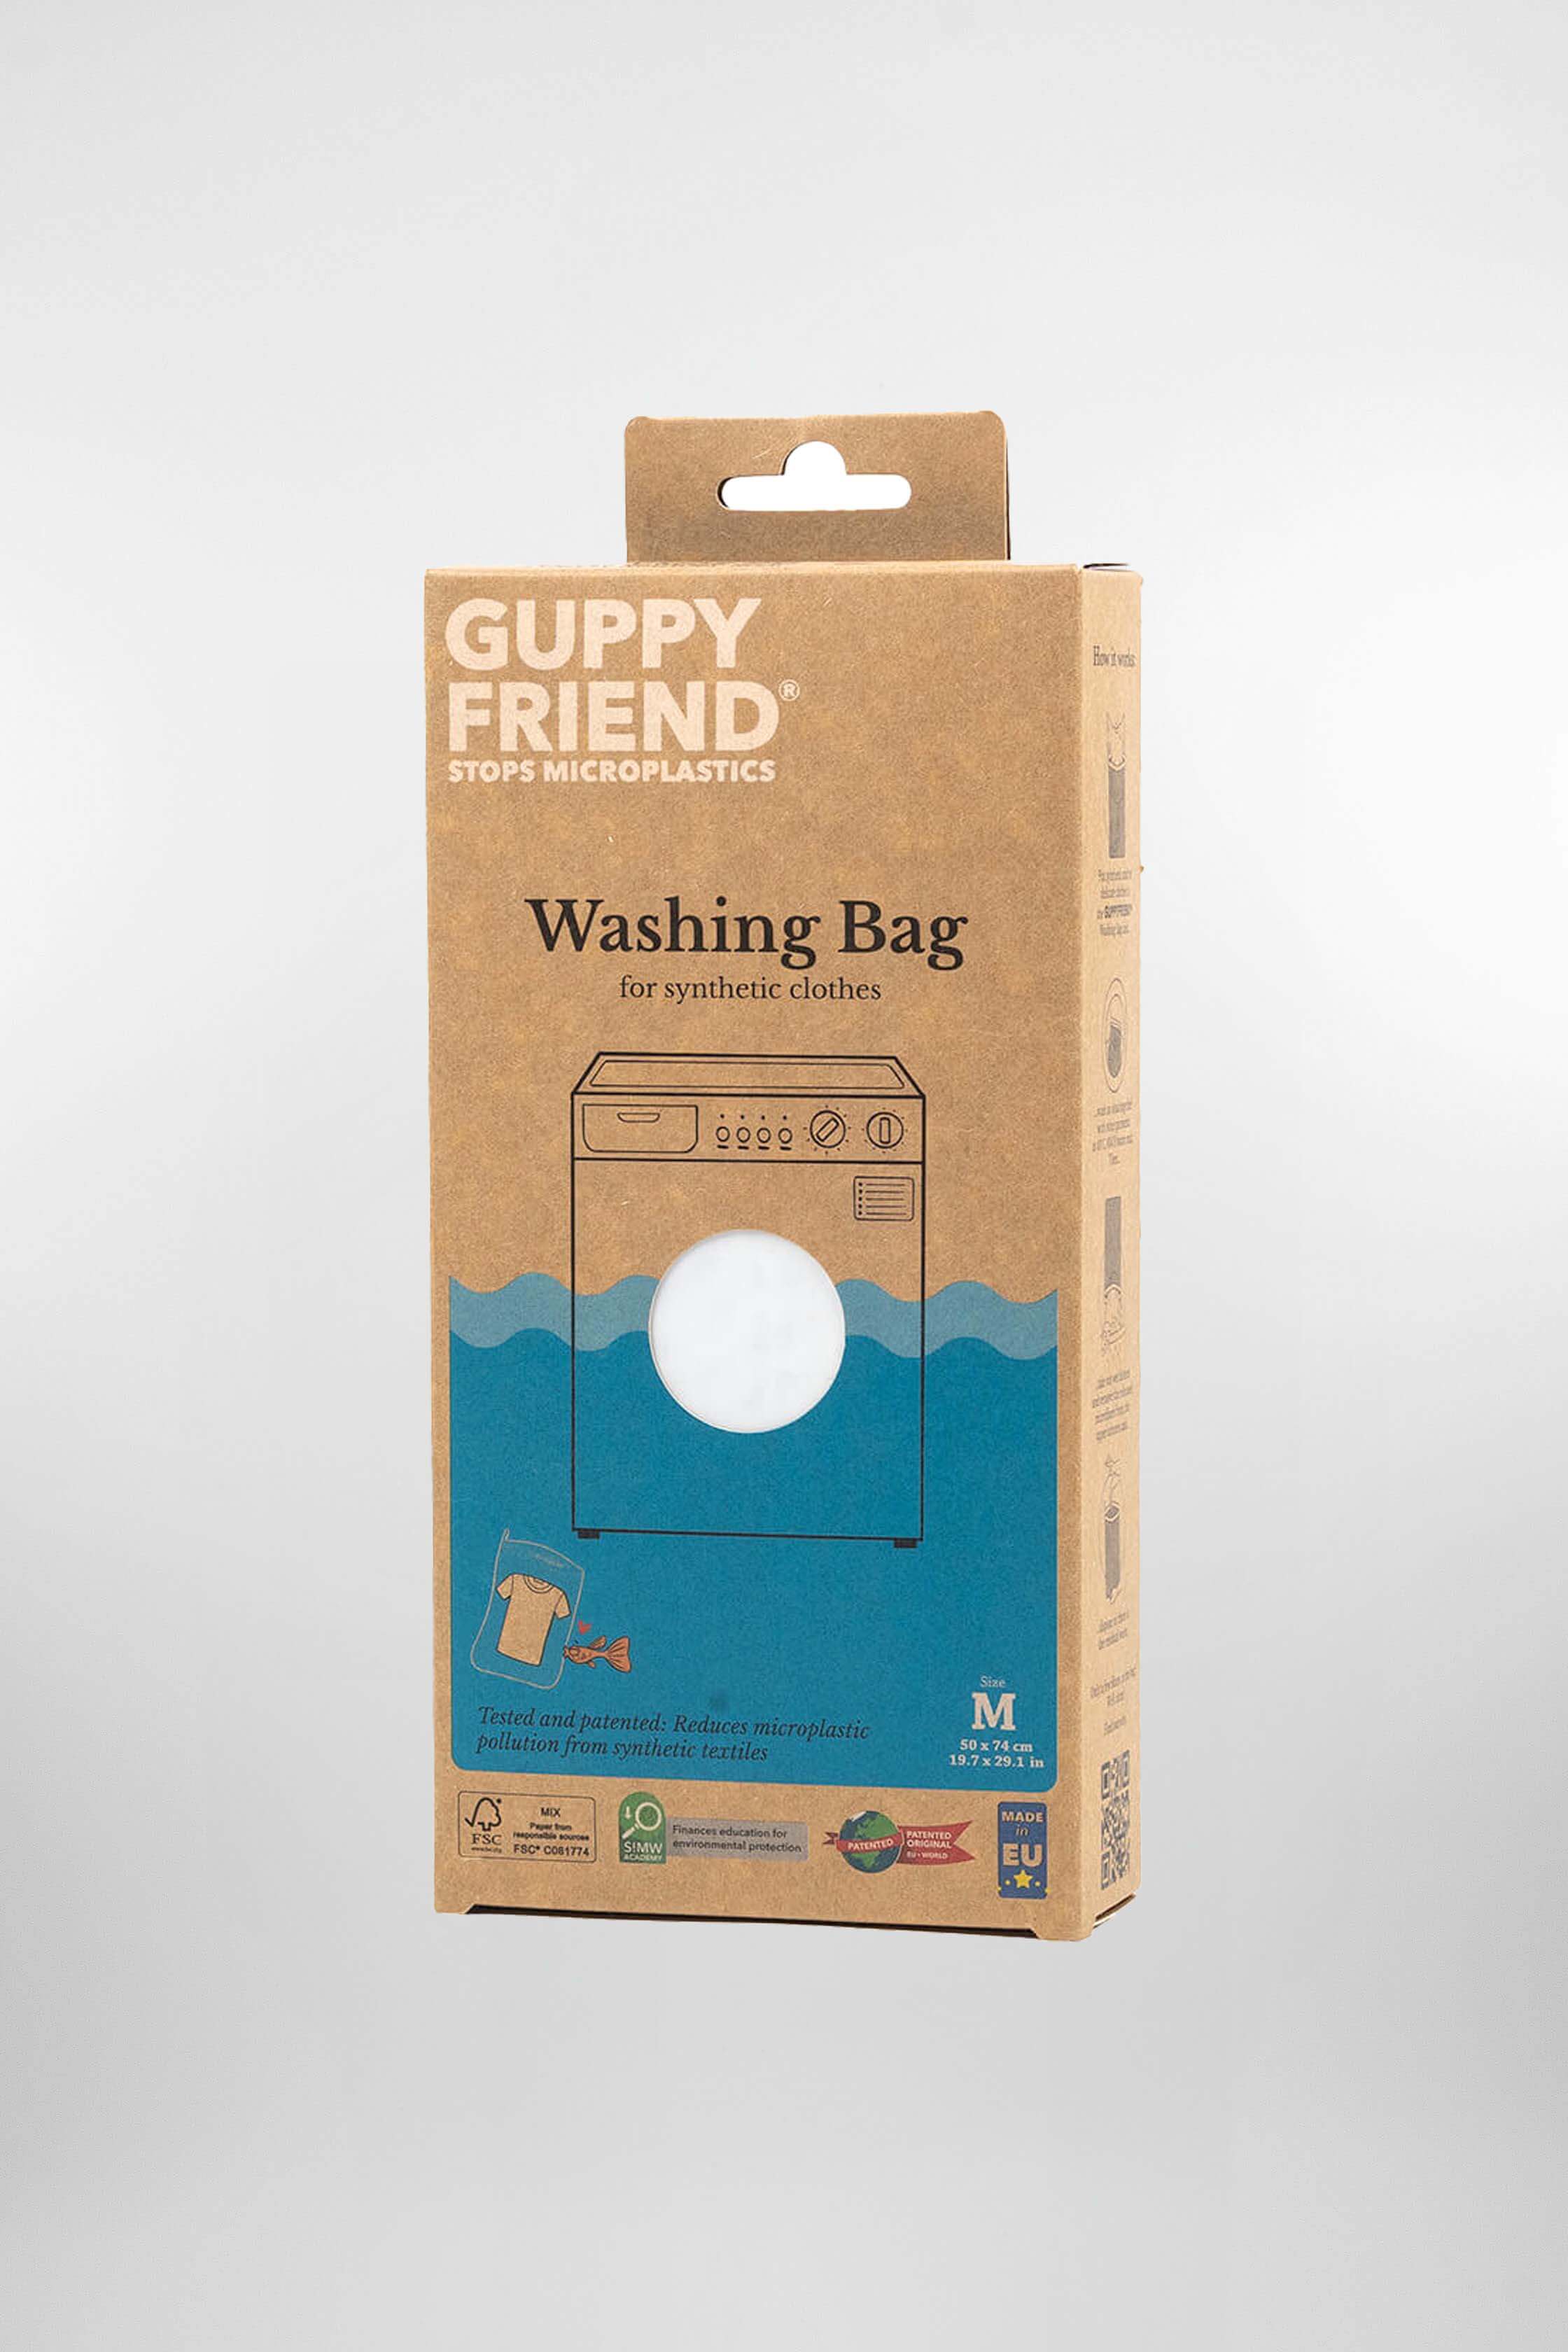 A picture of the Washing Bag from Guppy Friend sold by Arctic Legacy